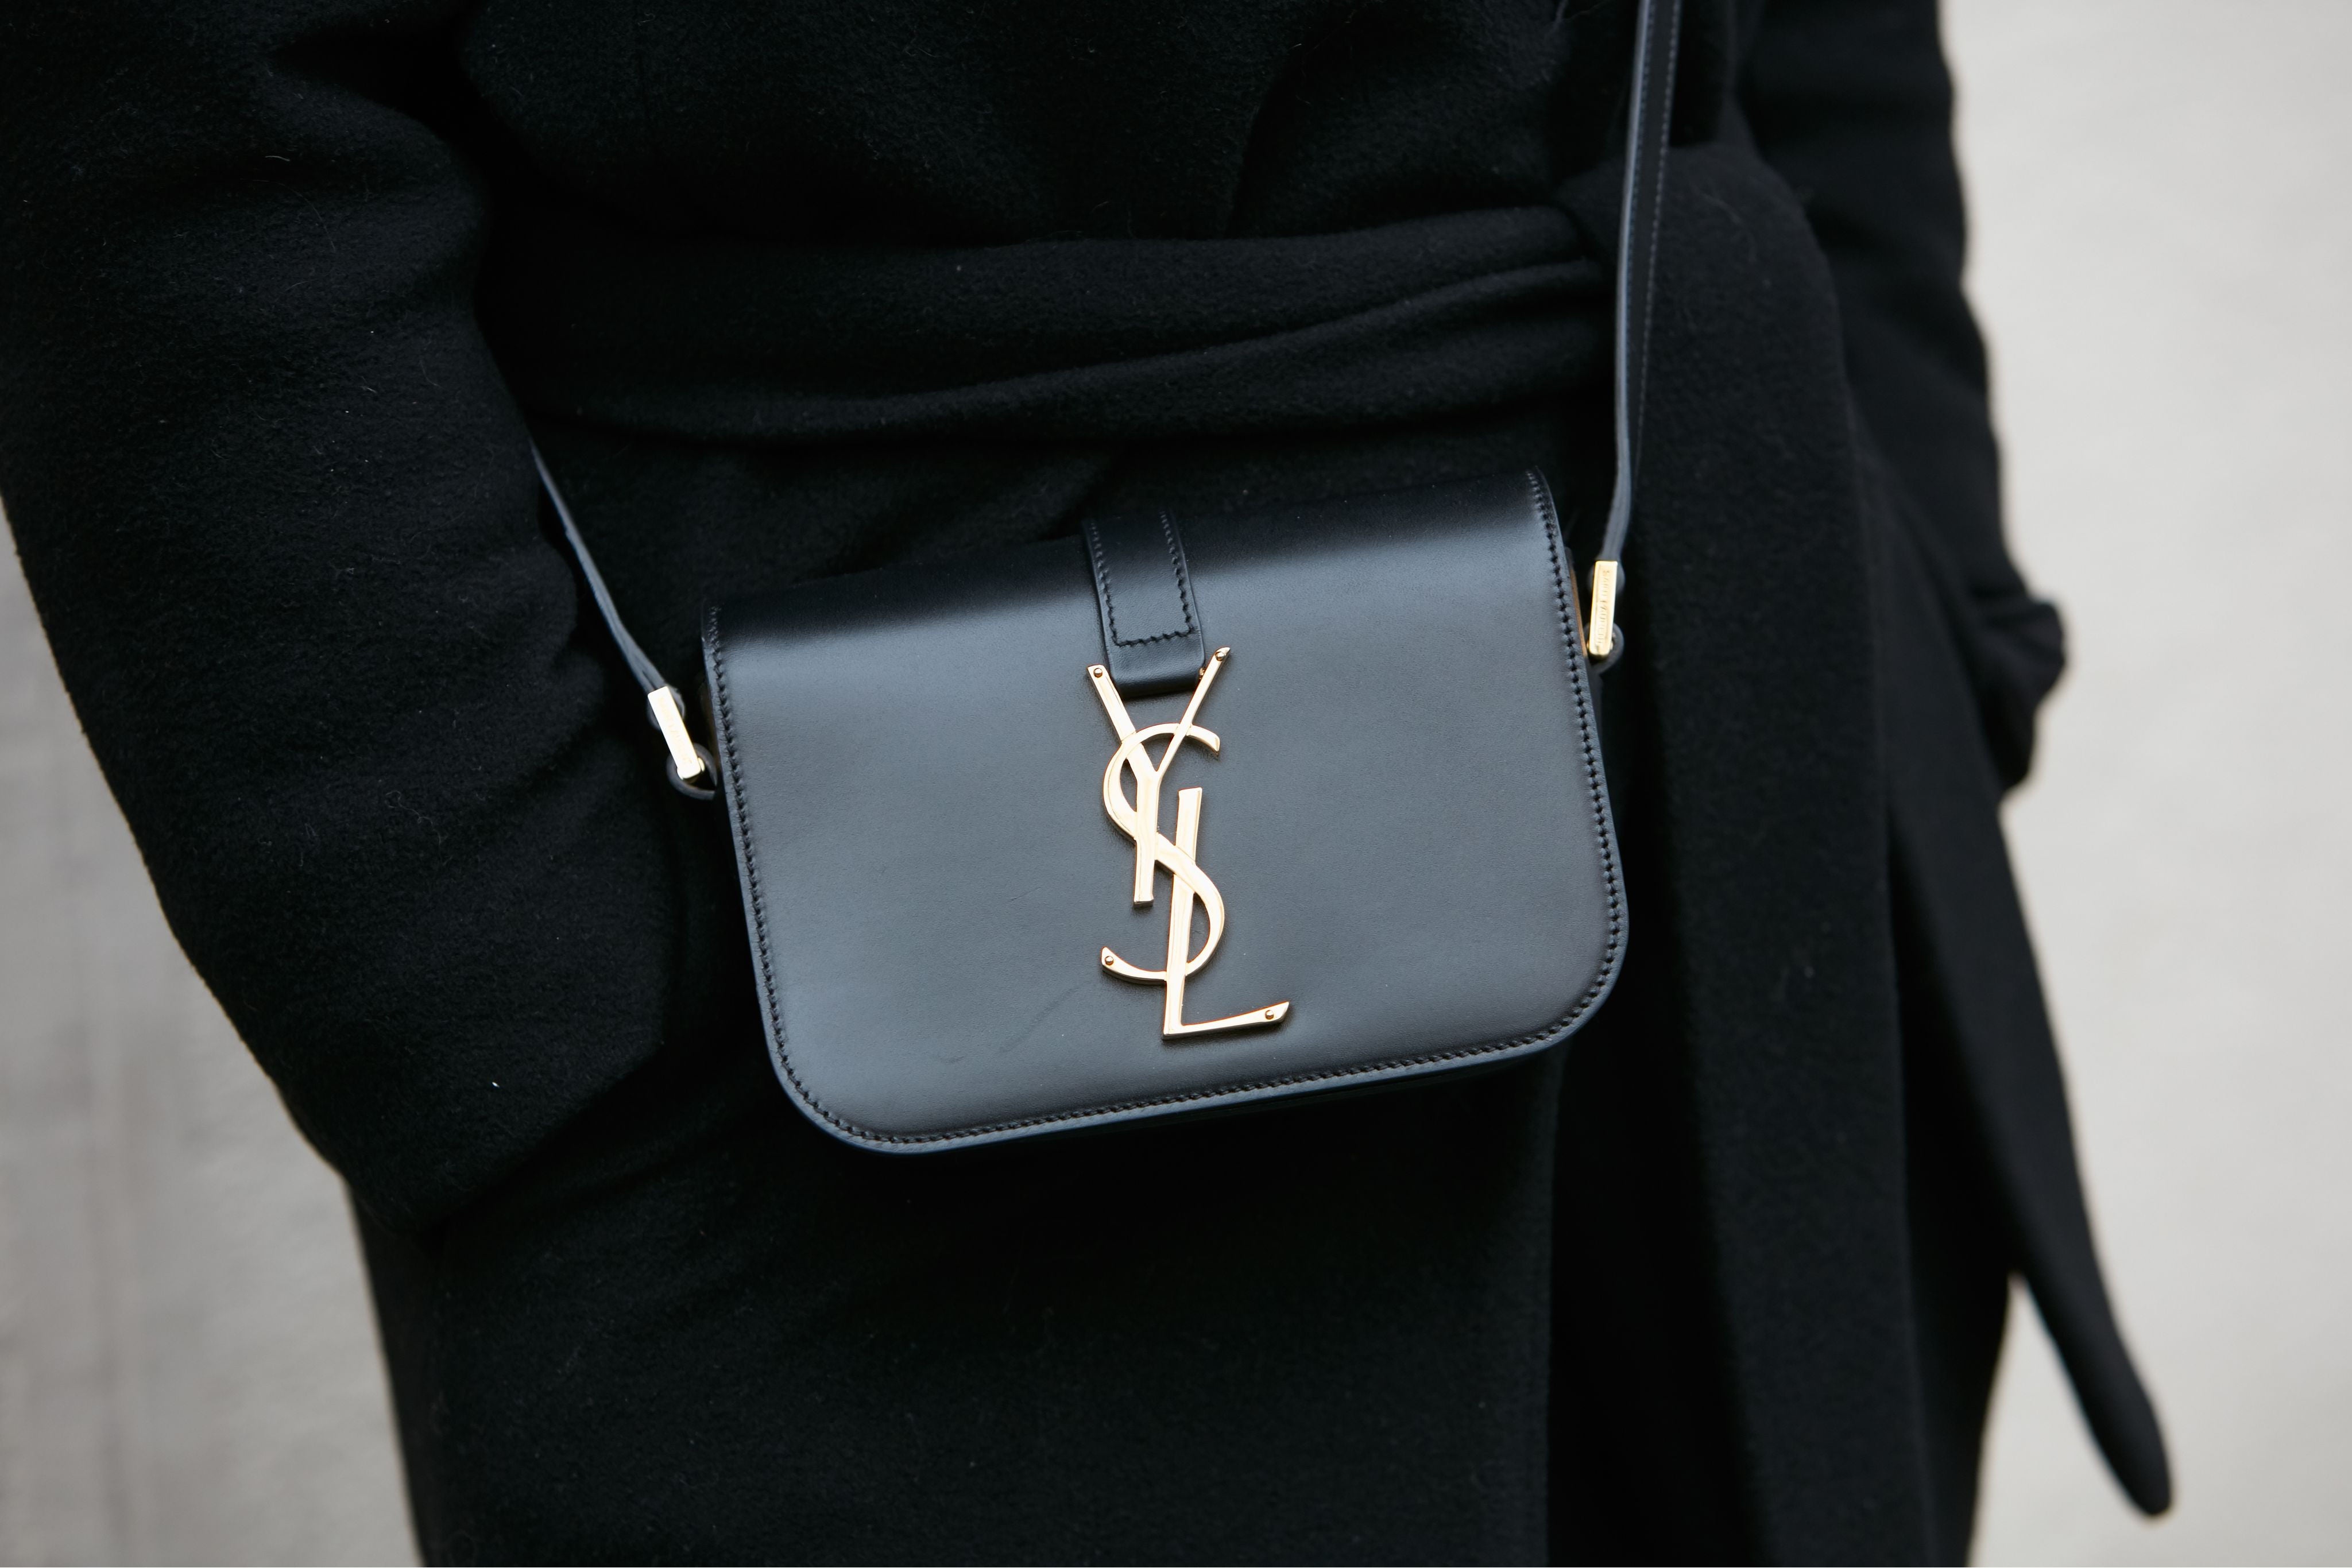 YSL vs Louis Vuitton - Which One is Better and more expensive